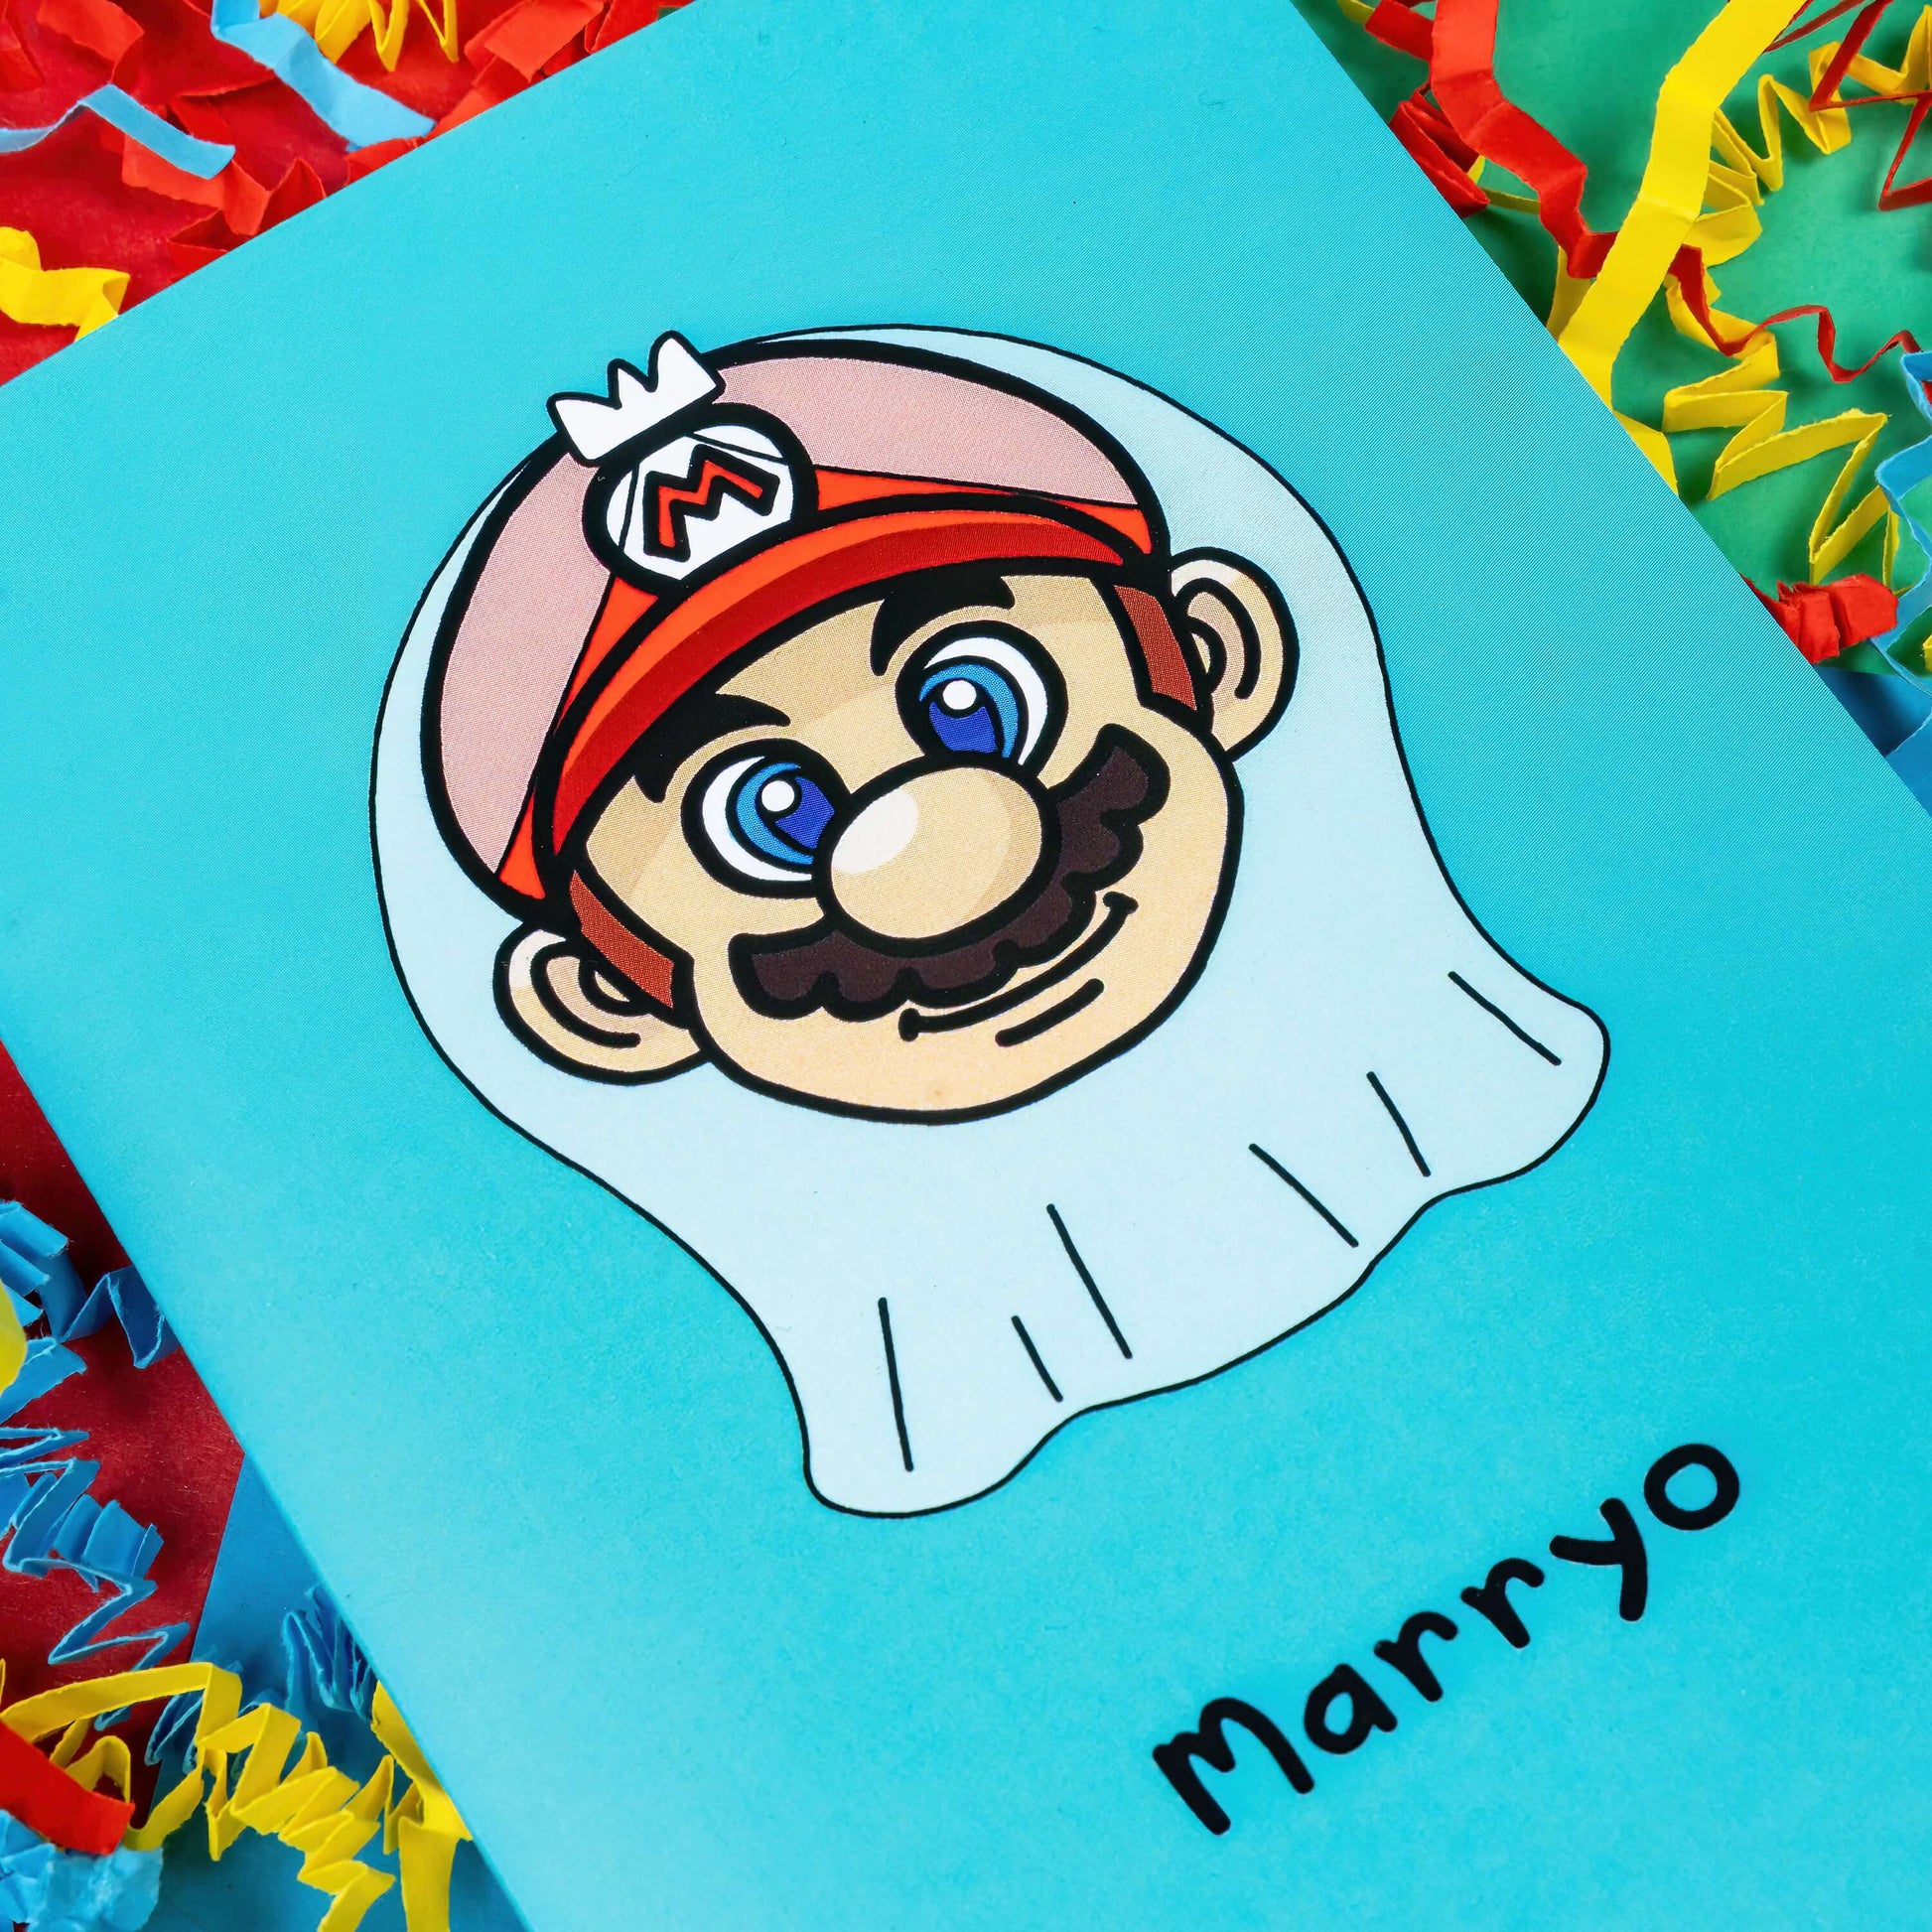 The Marryo - Mario Engagement Wedding Card on a red, blue and green background with red, yellow and blue crinkle card confetti. The blue a6 congratulations card features a smiling nintendo mario character head wearing a white bridal wedding veil, underneath him is black text reading 'Marryo'.